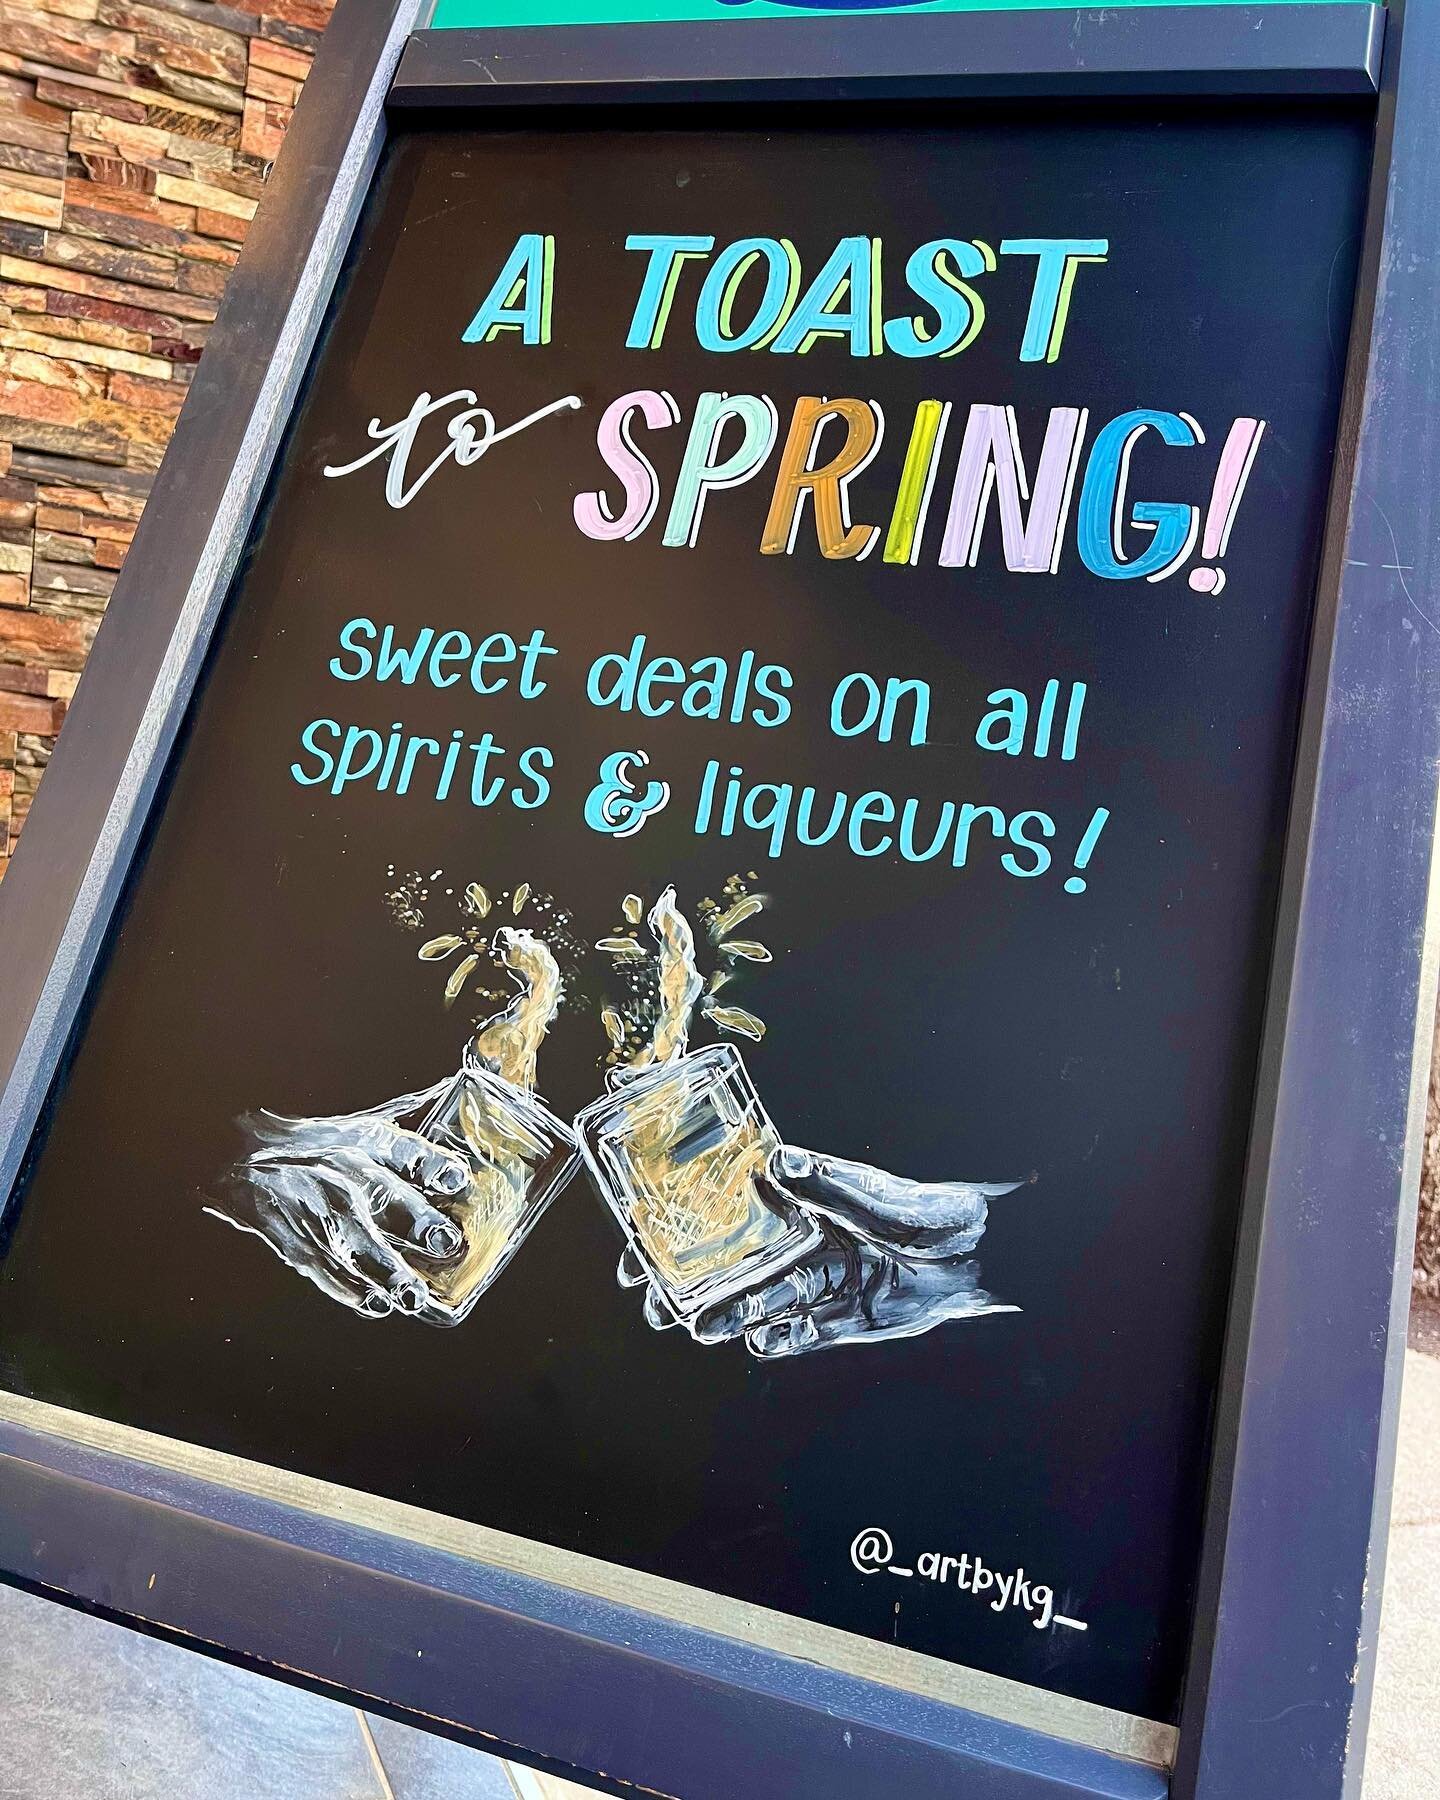 The first week of spring is here! Check out @vomfassbrookline in Coolidge Corner to see their new spring deals 🥂🍷💐 
.
.
.
#vomfass #chalkboardart #chalkboardartist #chalkboardsigns #handlettering #spring #springdeals #art #bostonartist #explorepag